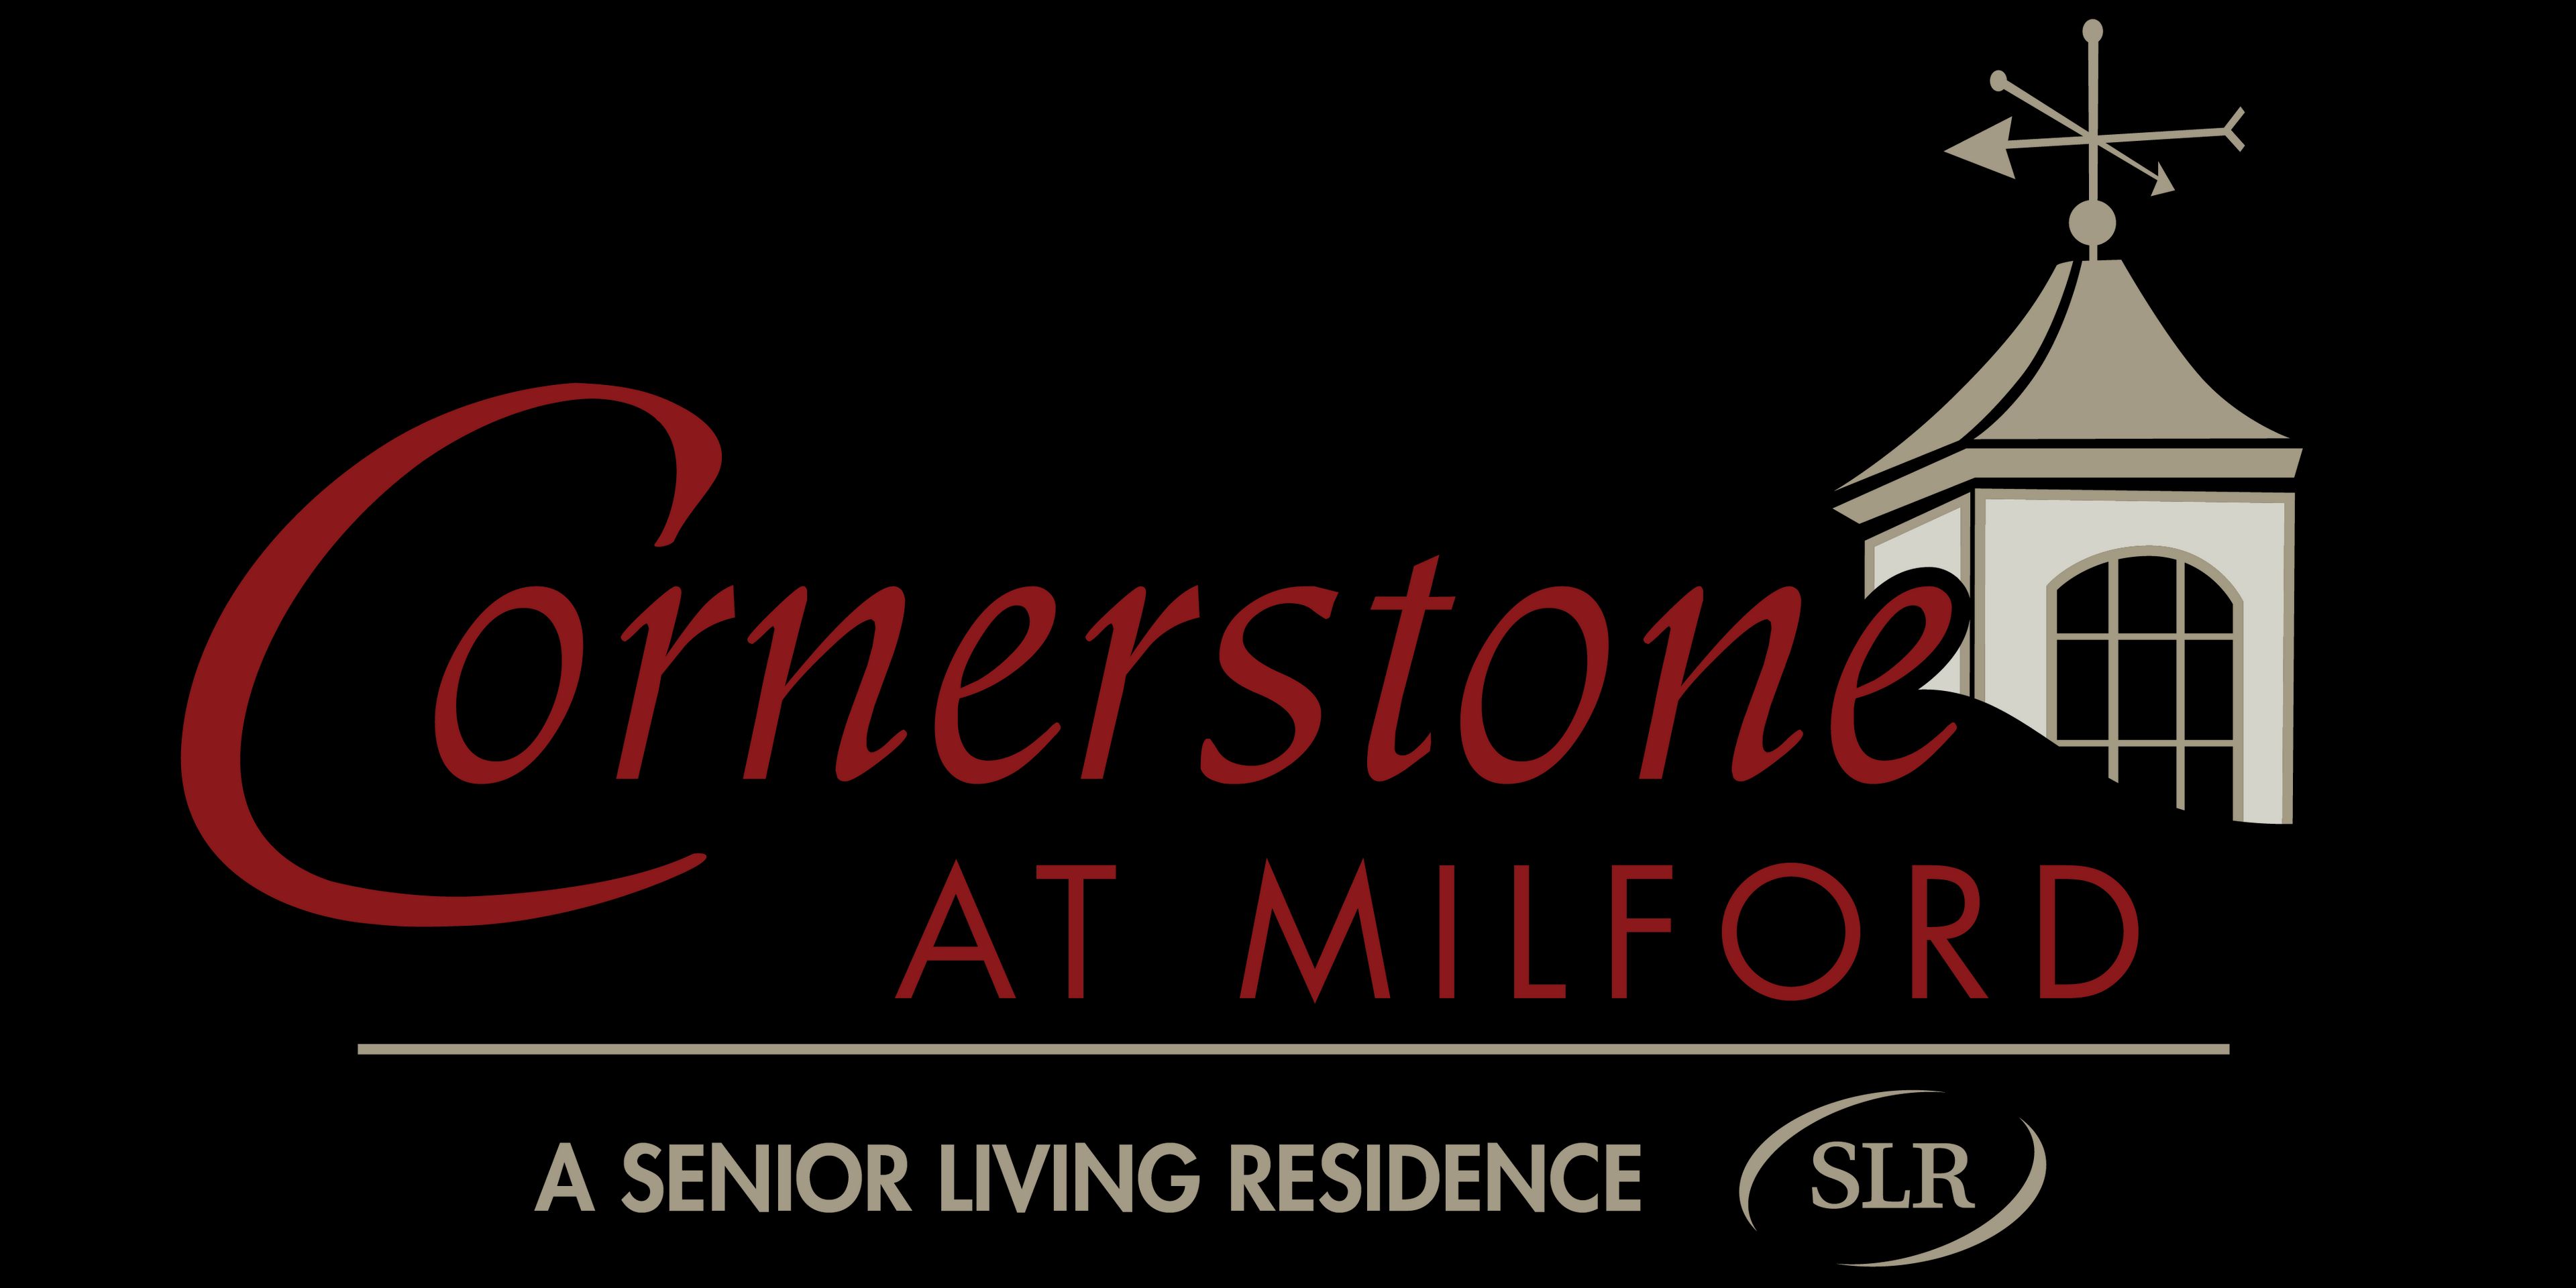 Exterior view of Cornerstone at Milford senior living community with logo symbol.